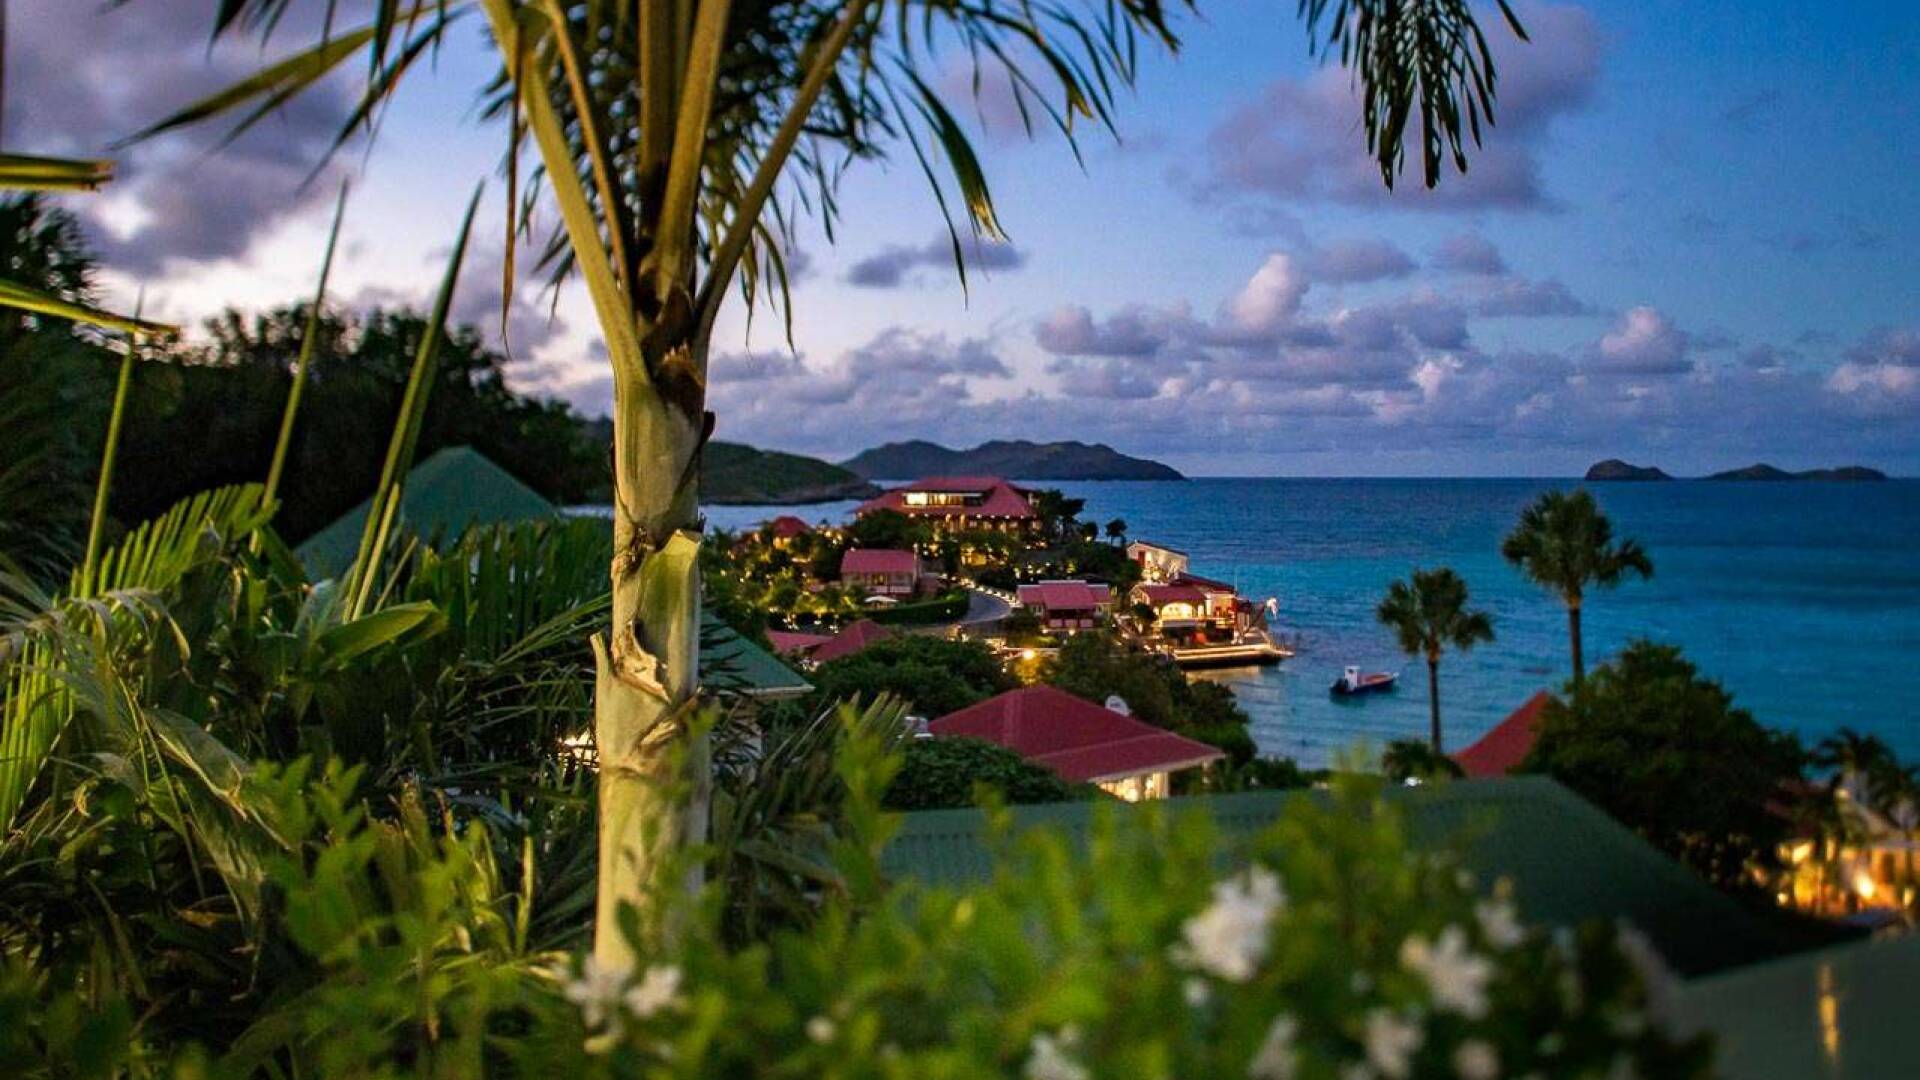 The view from WV SAX, St. Jean, St. Barthelemy